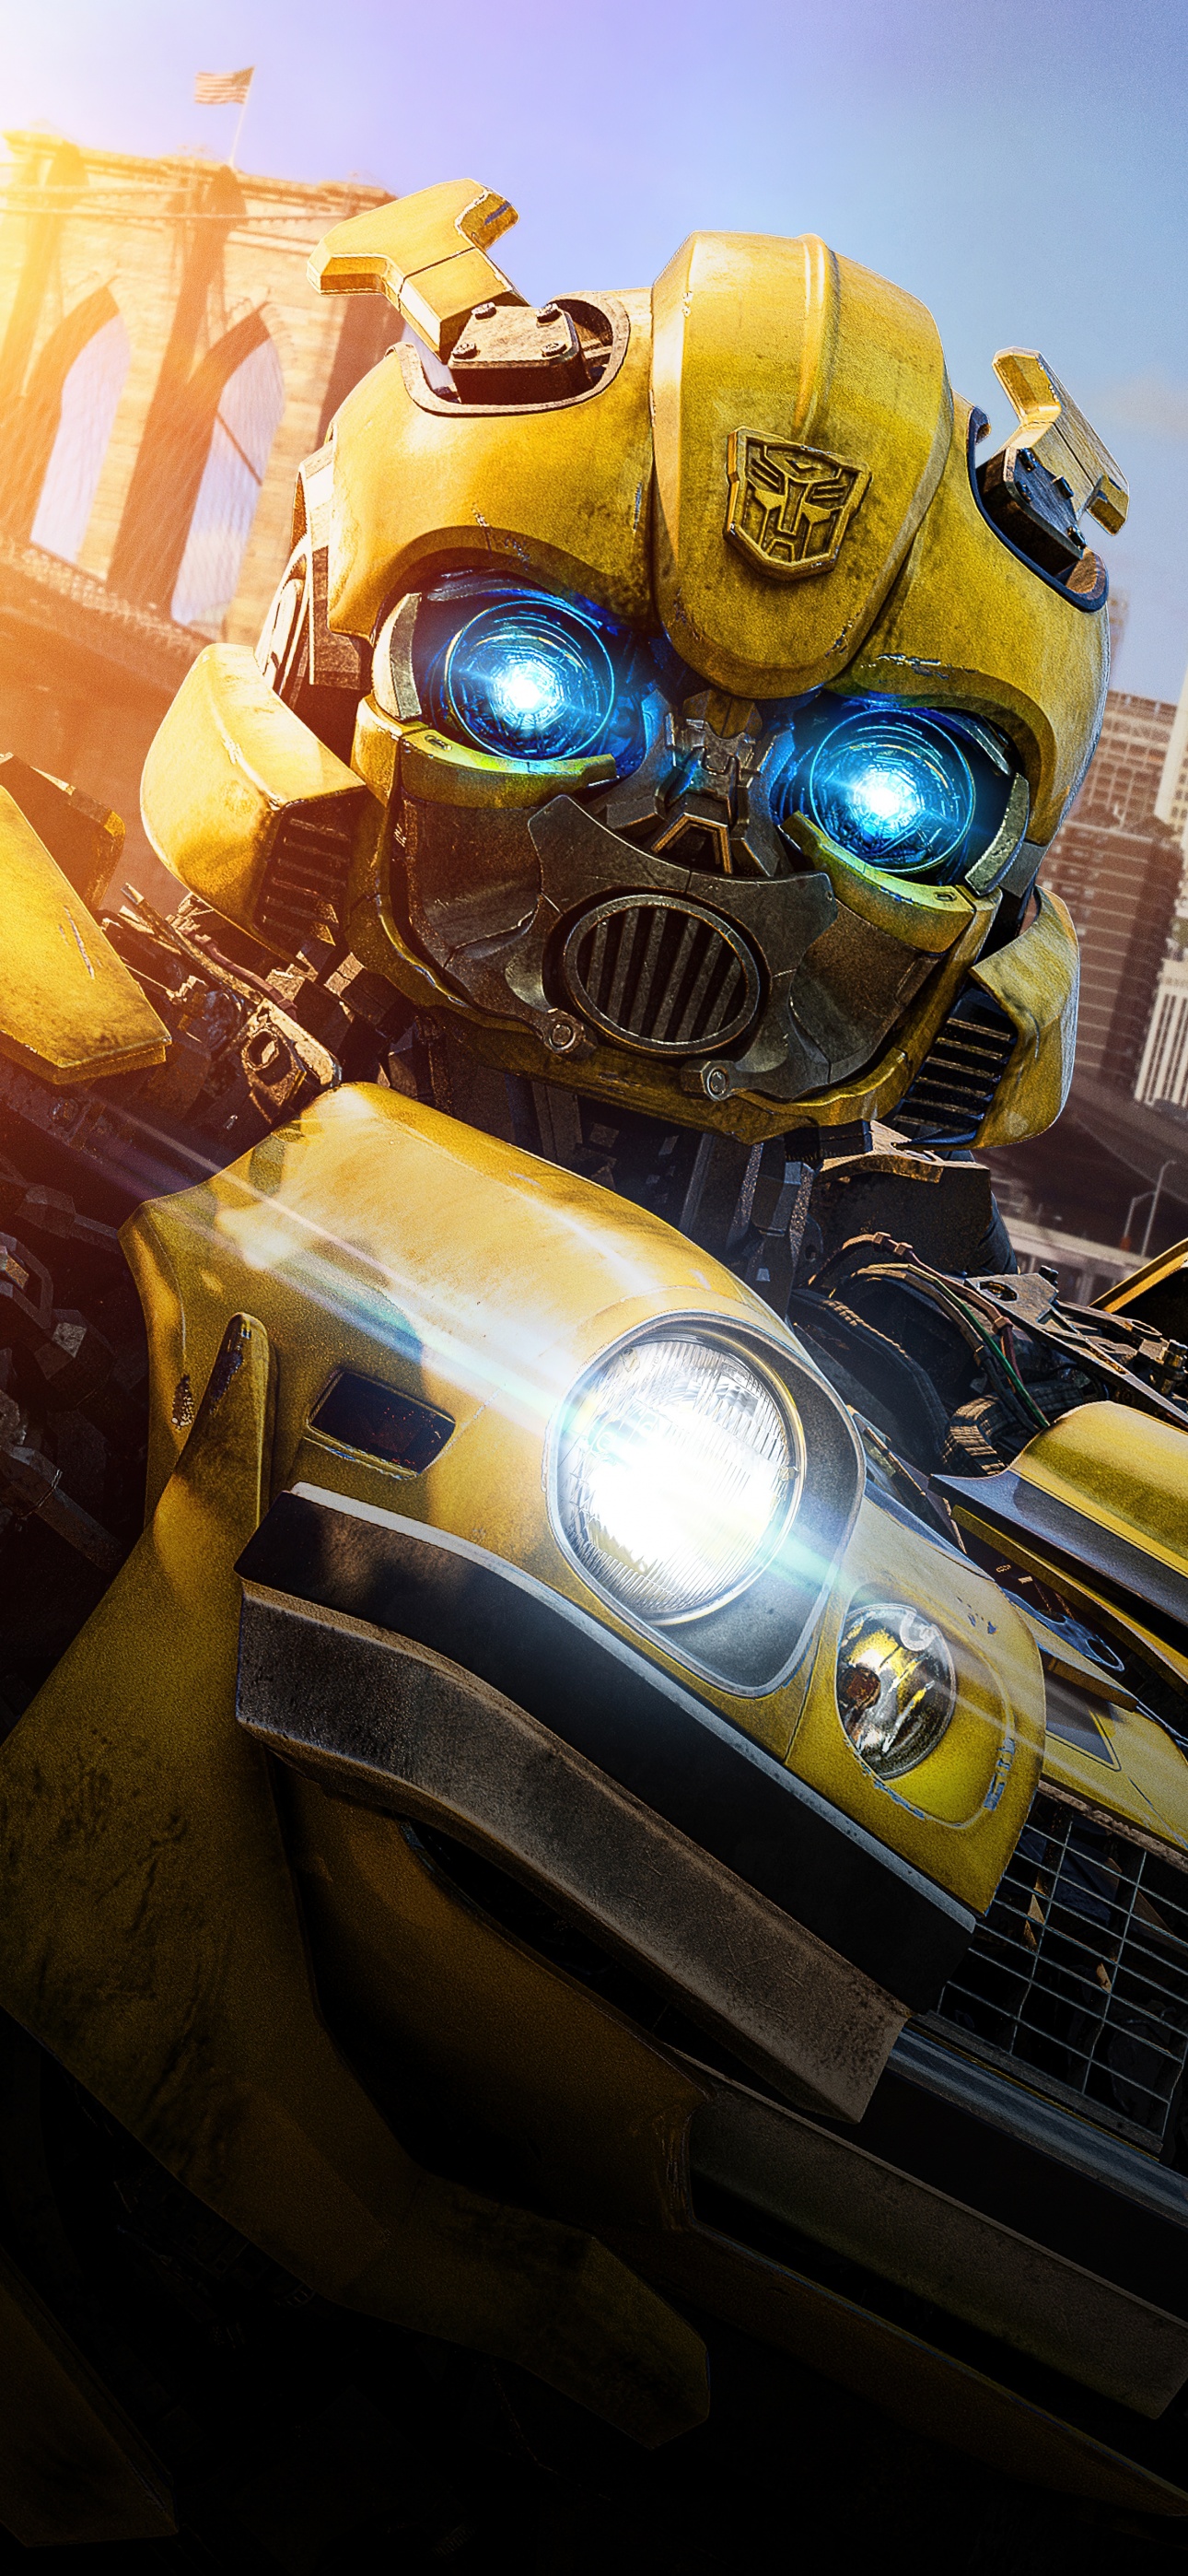 Wallpaper Robot Bumblebee Transformers Film Poster Yellow Background   Download Free Image